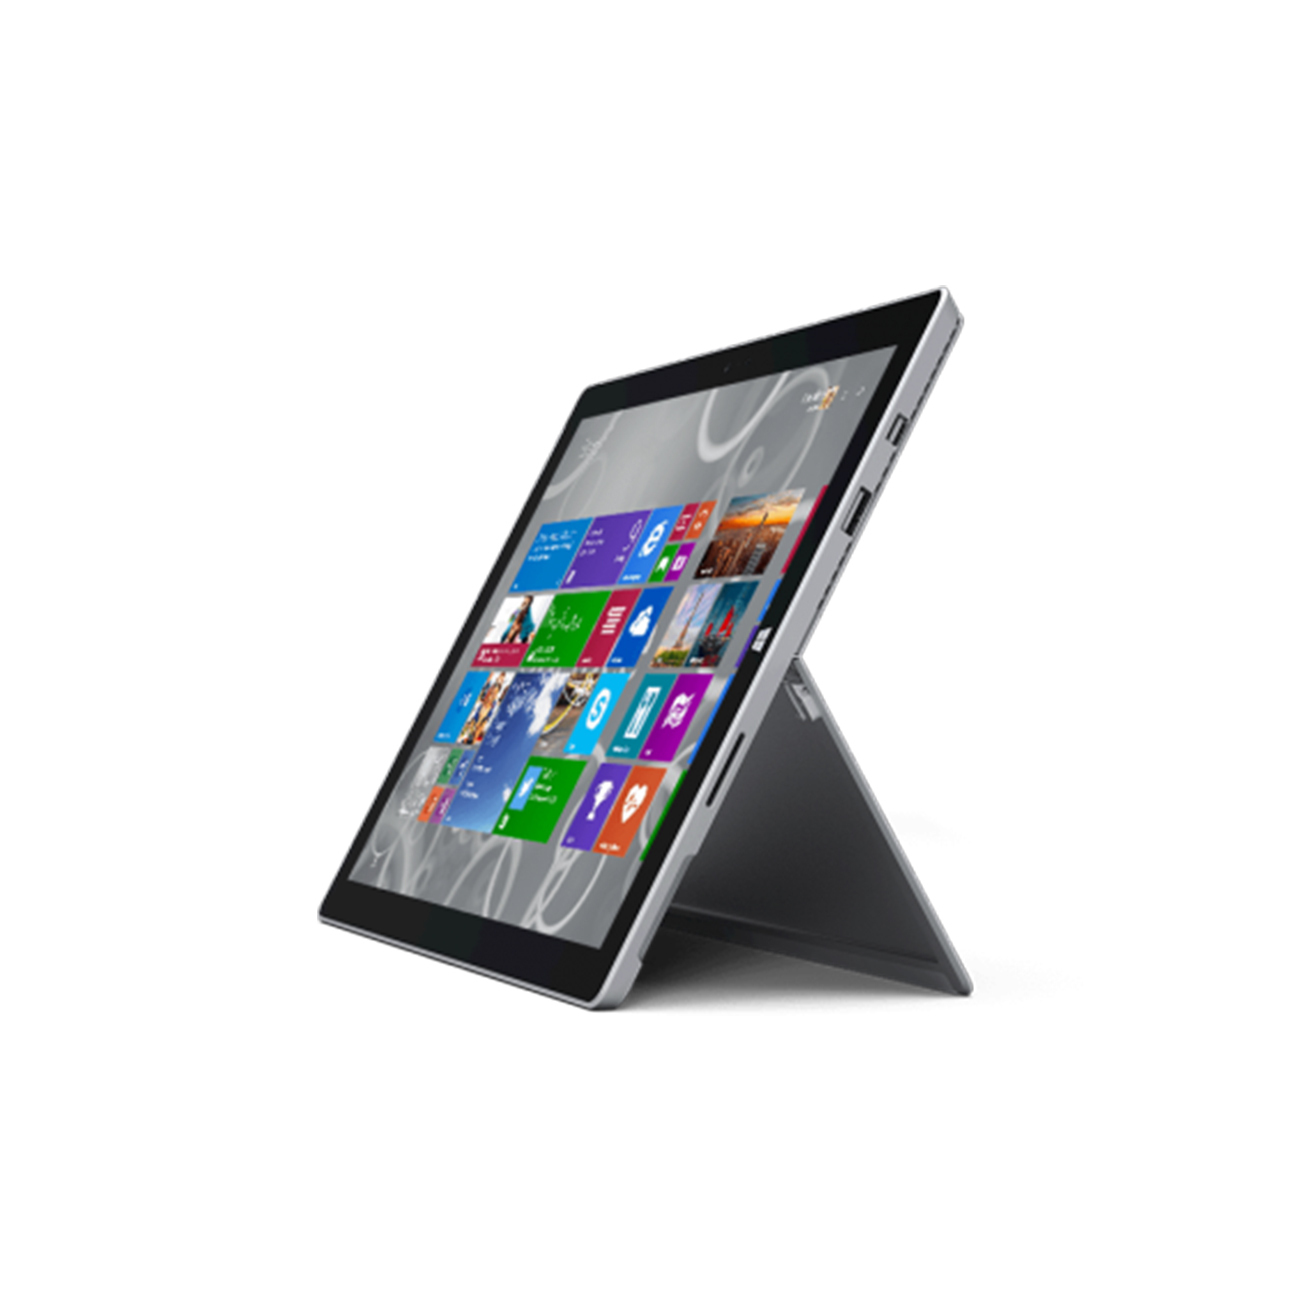 Microsoft Surface 3 - As New